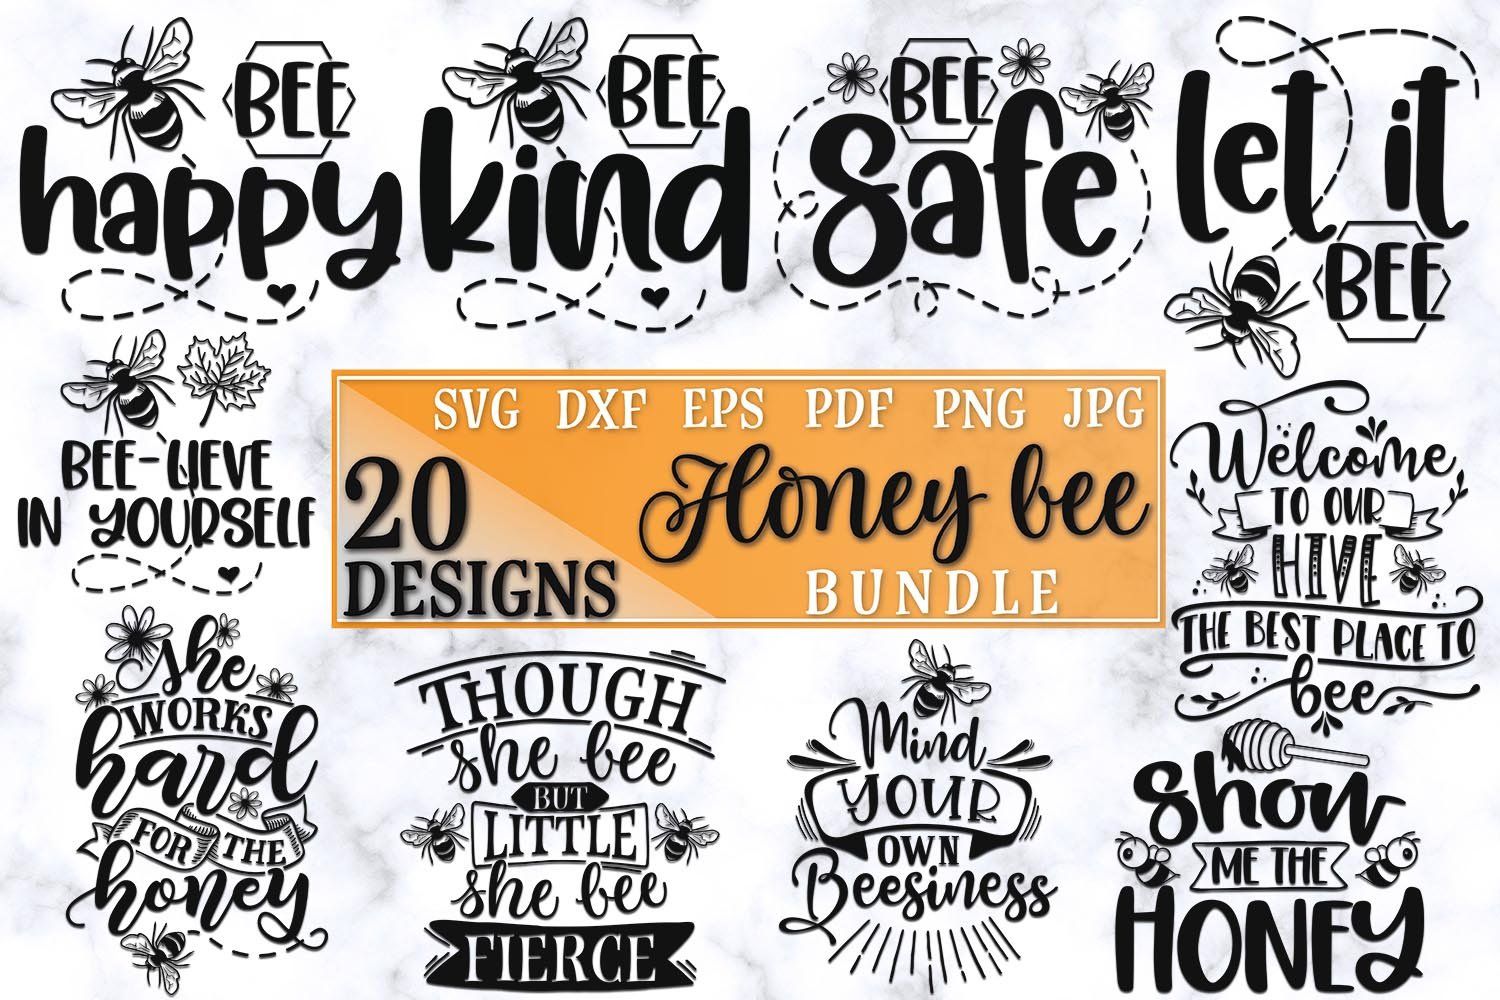 Download Bee Happy Svg Cut File Cute Bee Cutting File Kawaii Honeybee Svg Inspirational Quotes Silhouette Cricut Diy Vinyl Decals Baby Onesie T Shirt Clip Art Art Collectibles